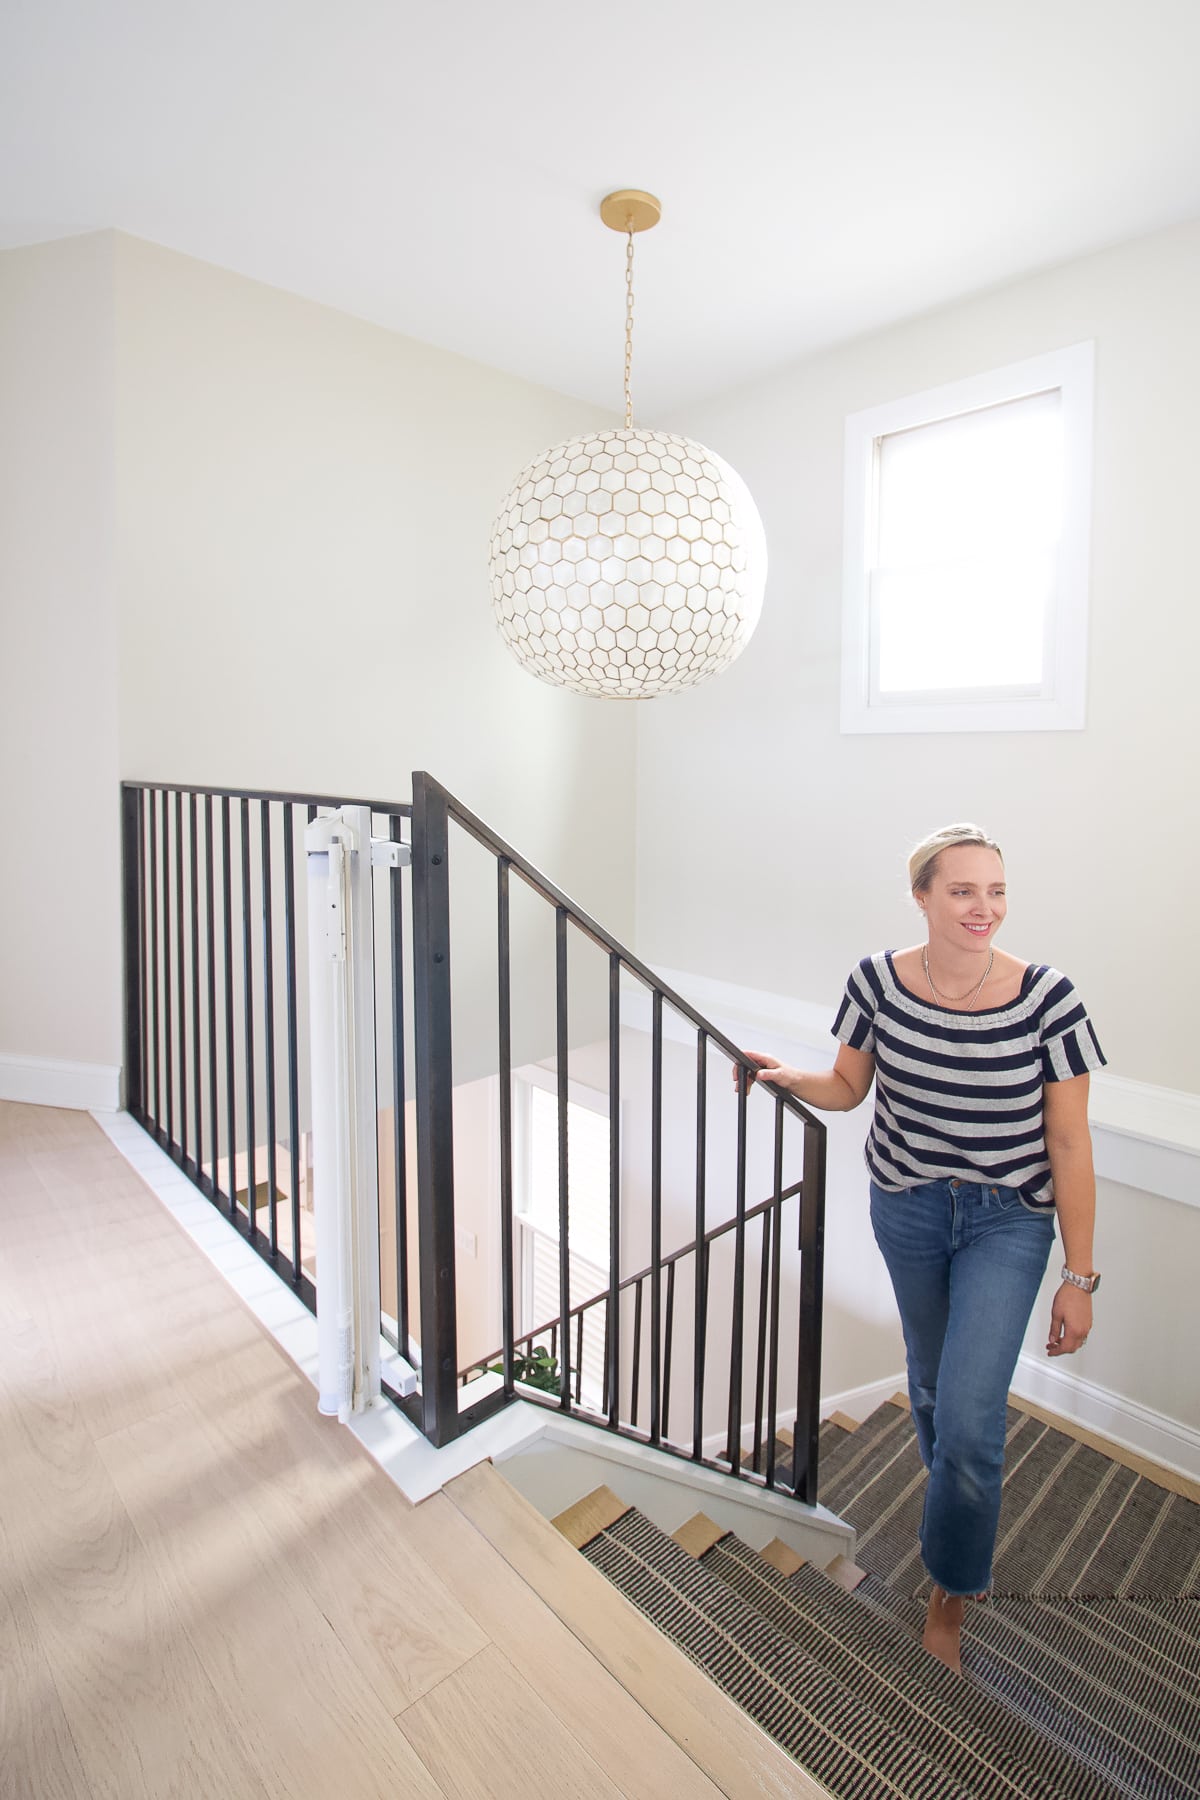 Common stair runner mistakes you might be making